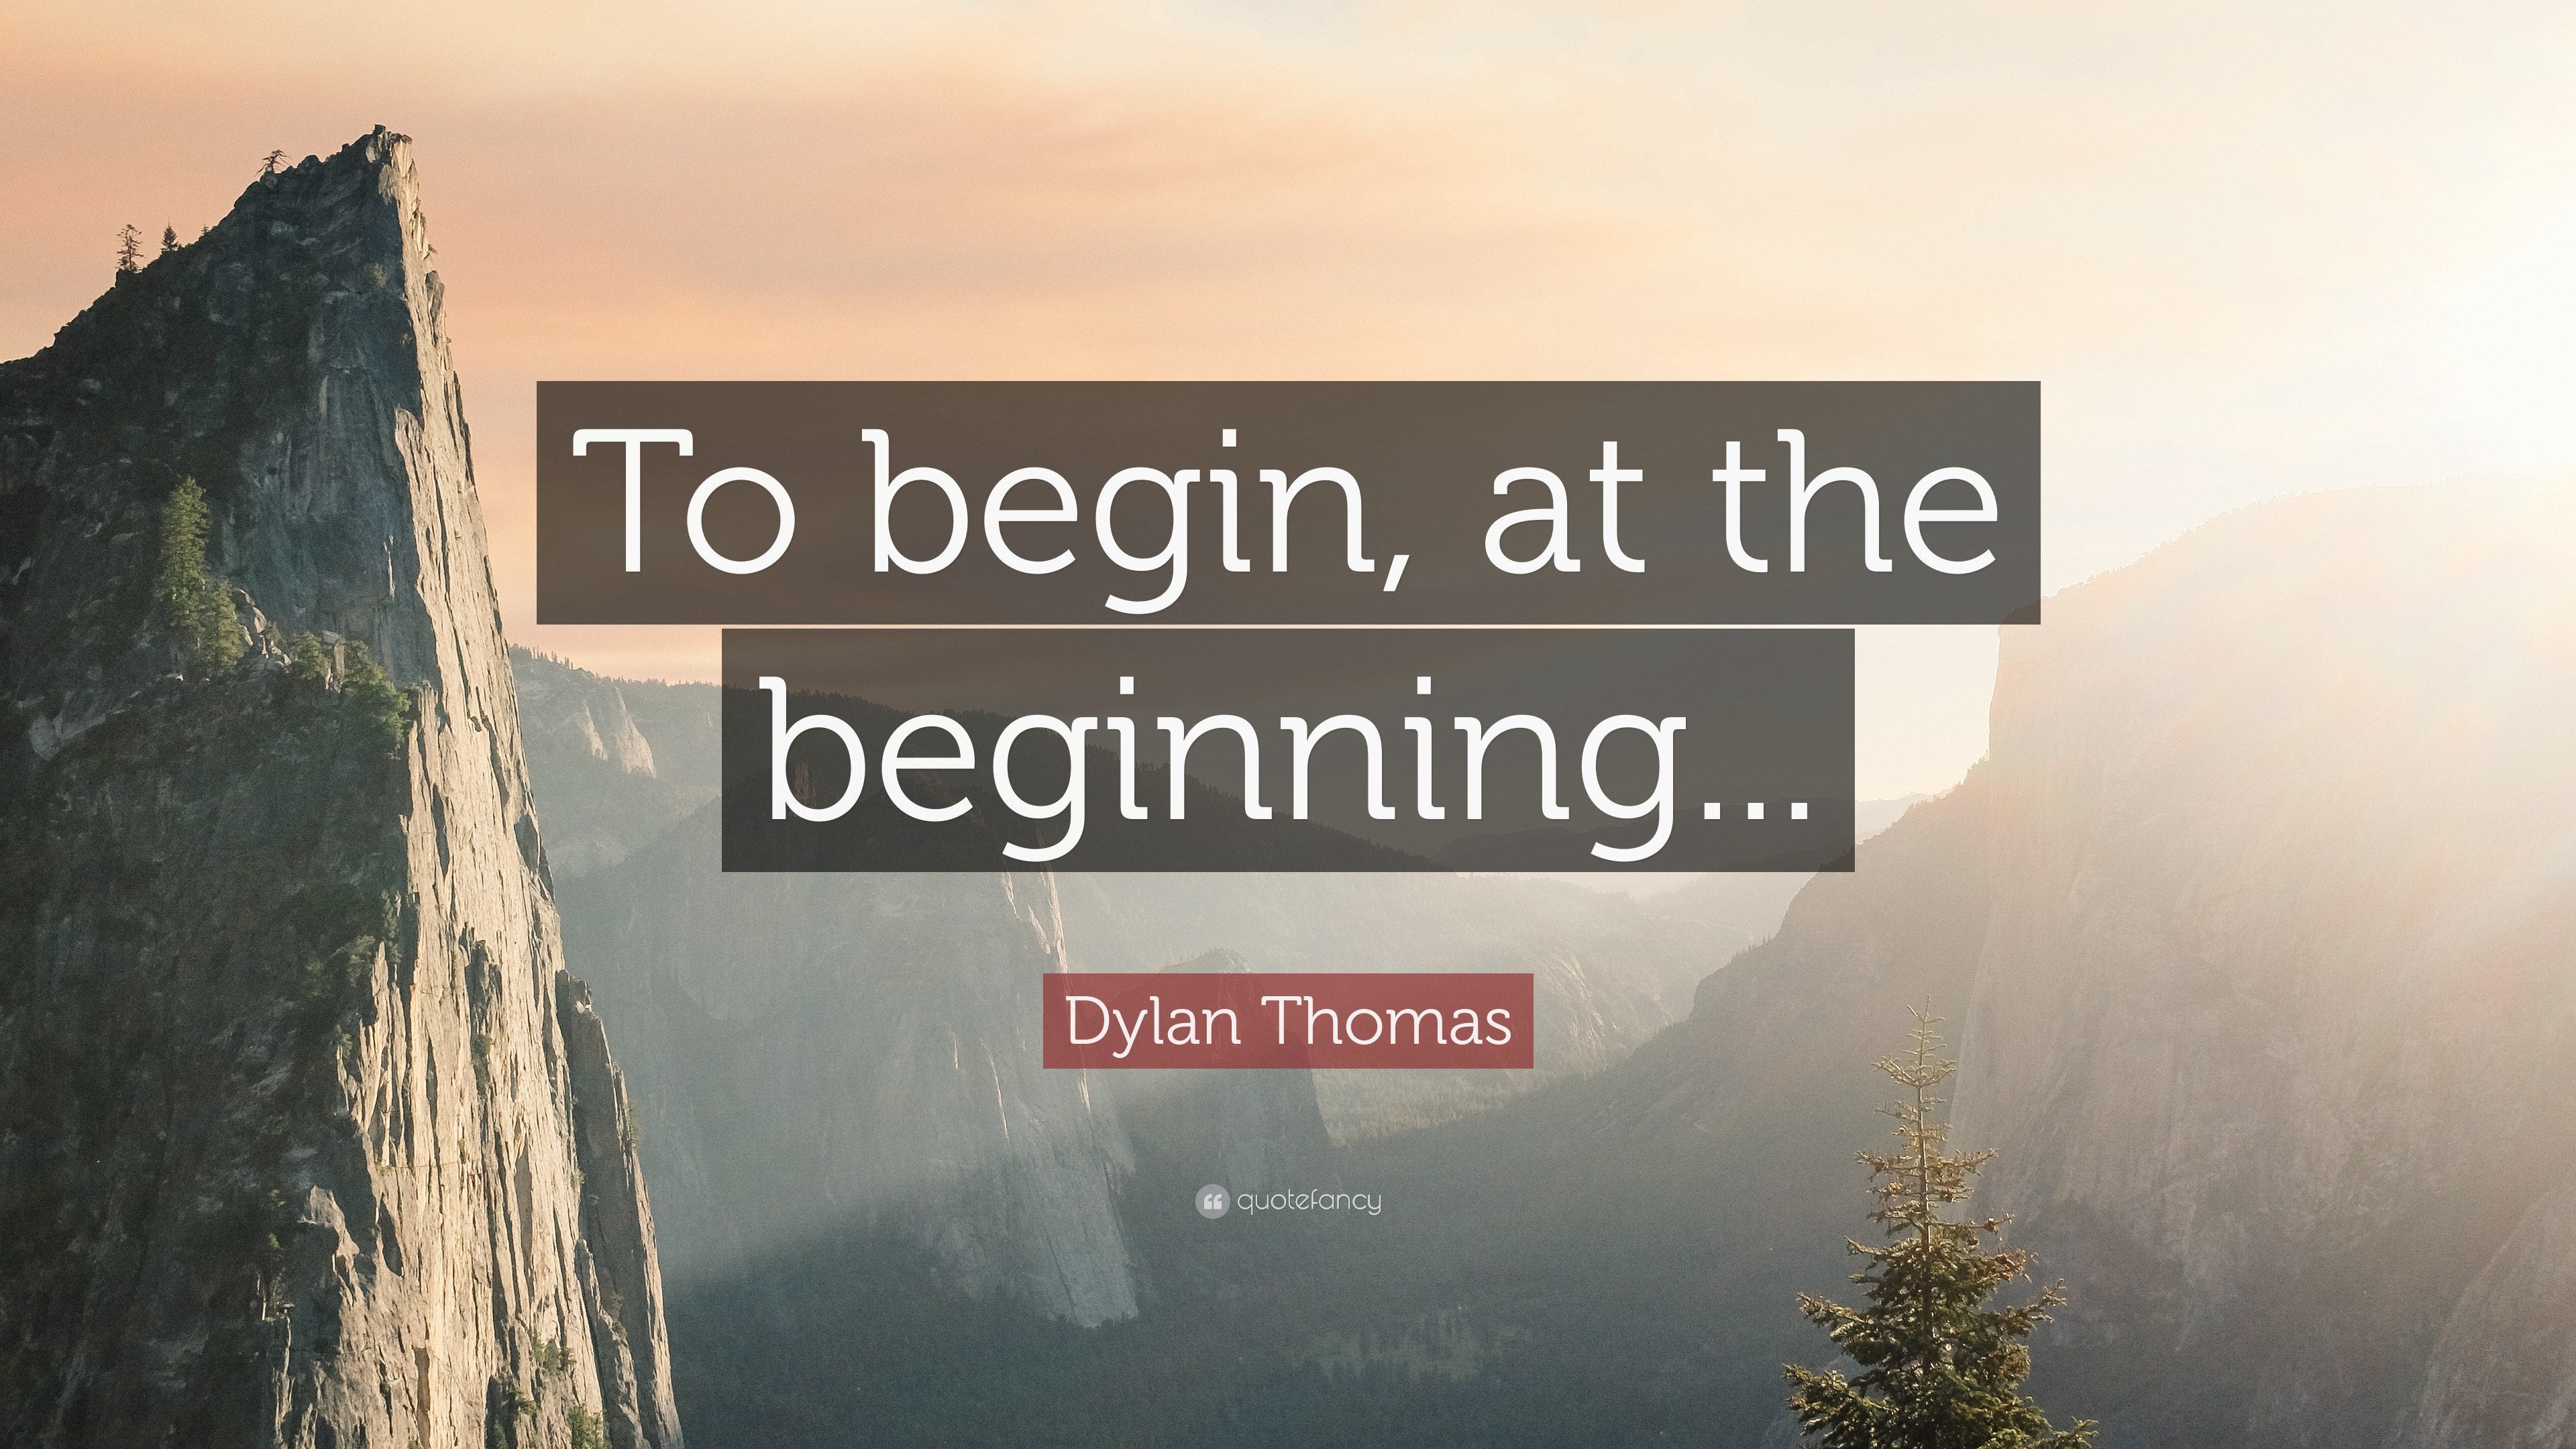 Dylan Thomas Quote: “To Begin, At The Beginning...”